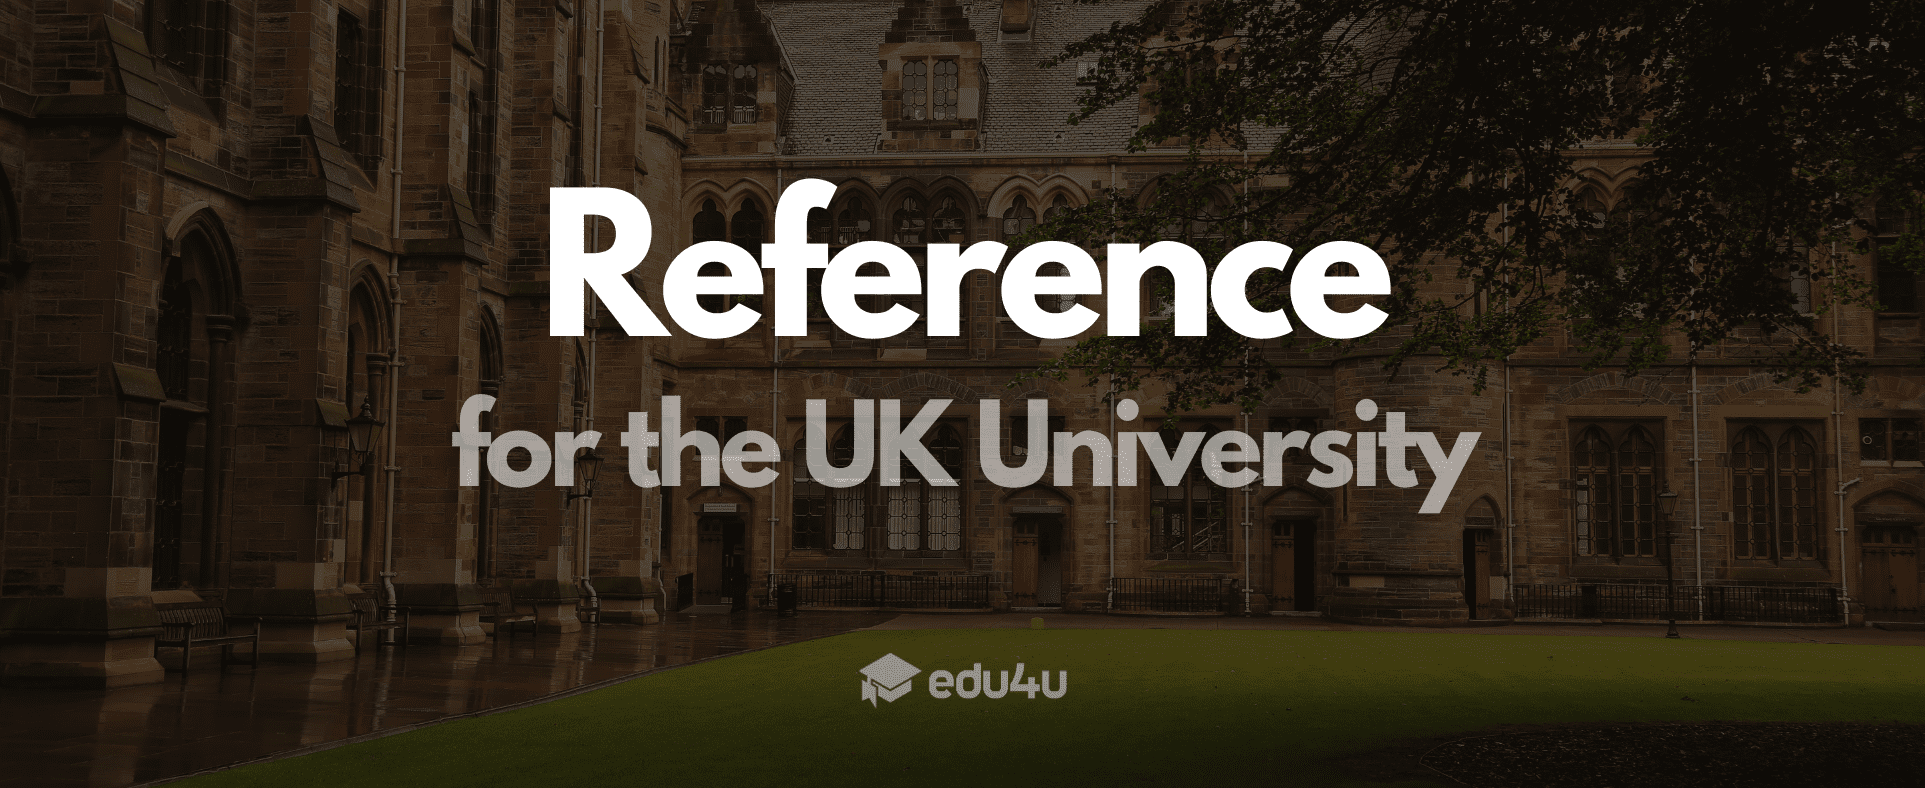 Reference for the UK university